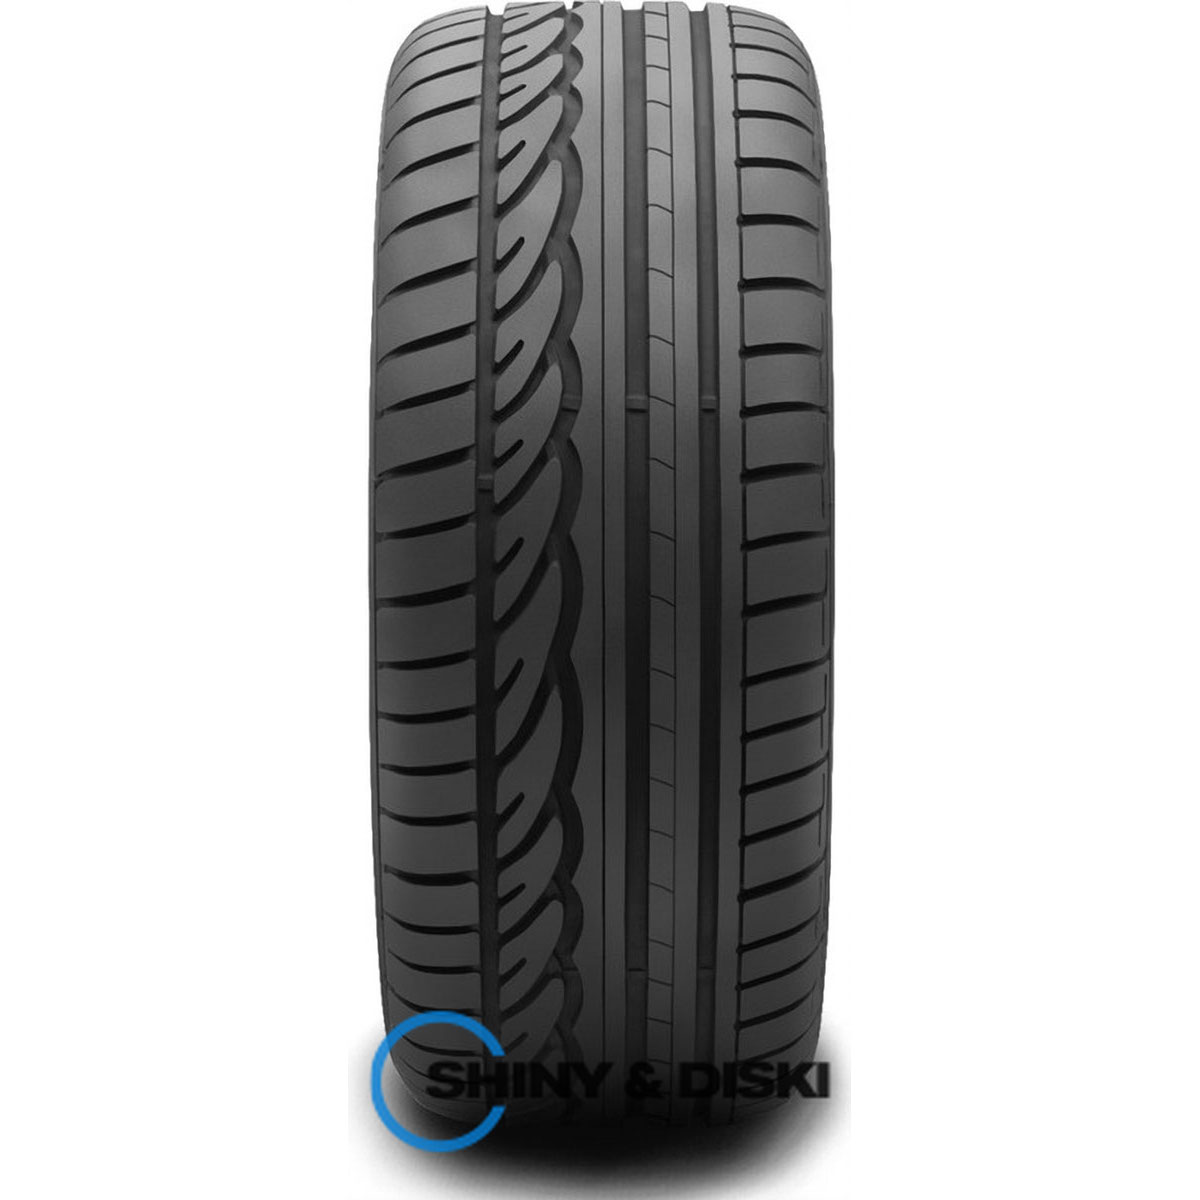 резина dunlop sp sport 01 a/s 245/45 r17 95v